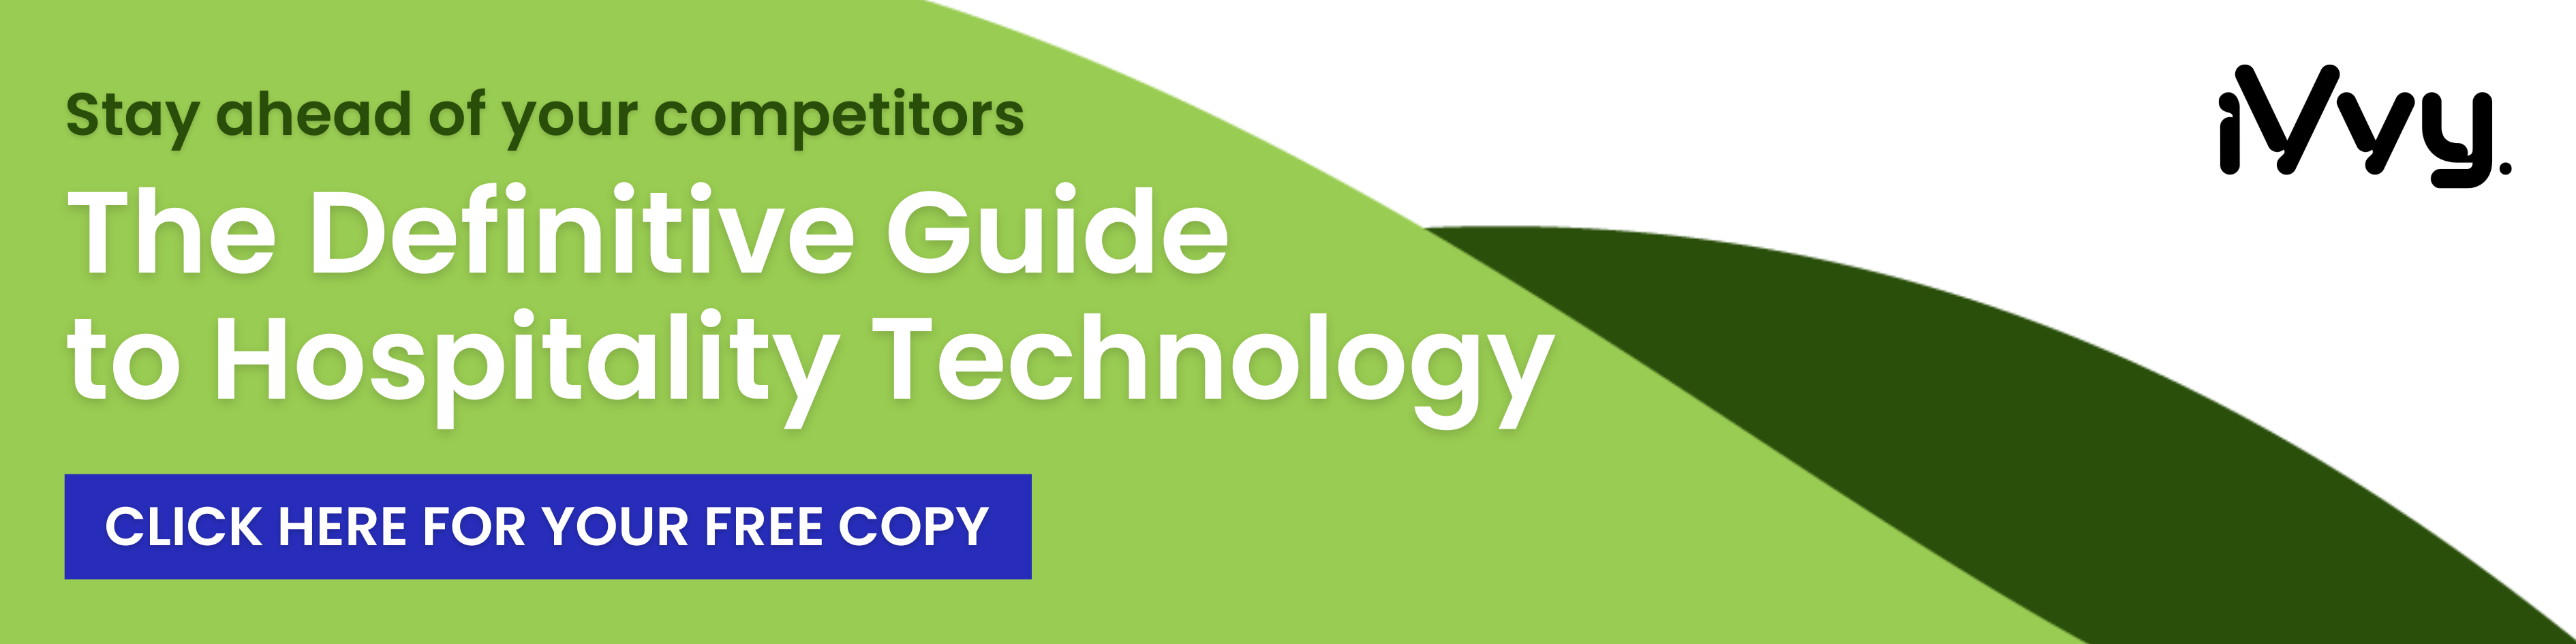 hospitality technology free guide from iVvy